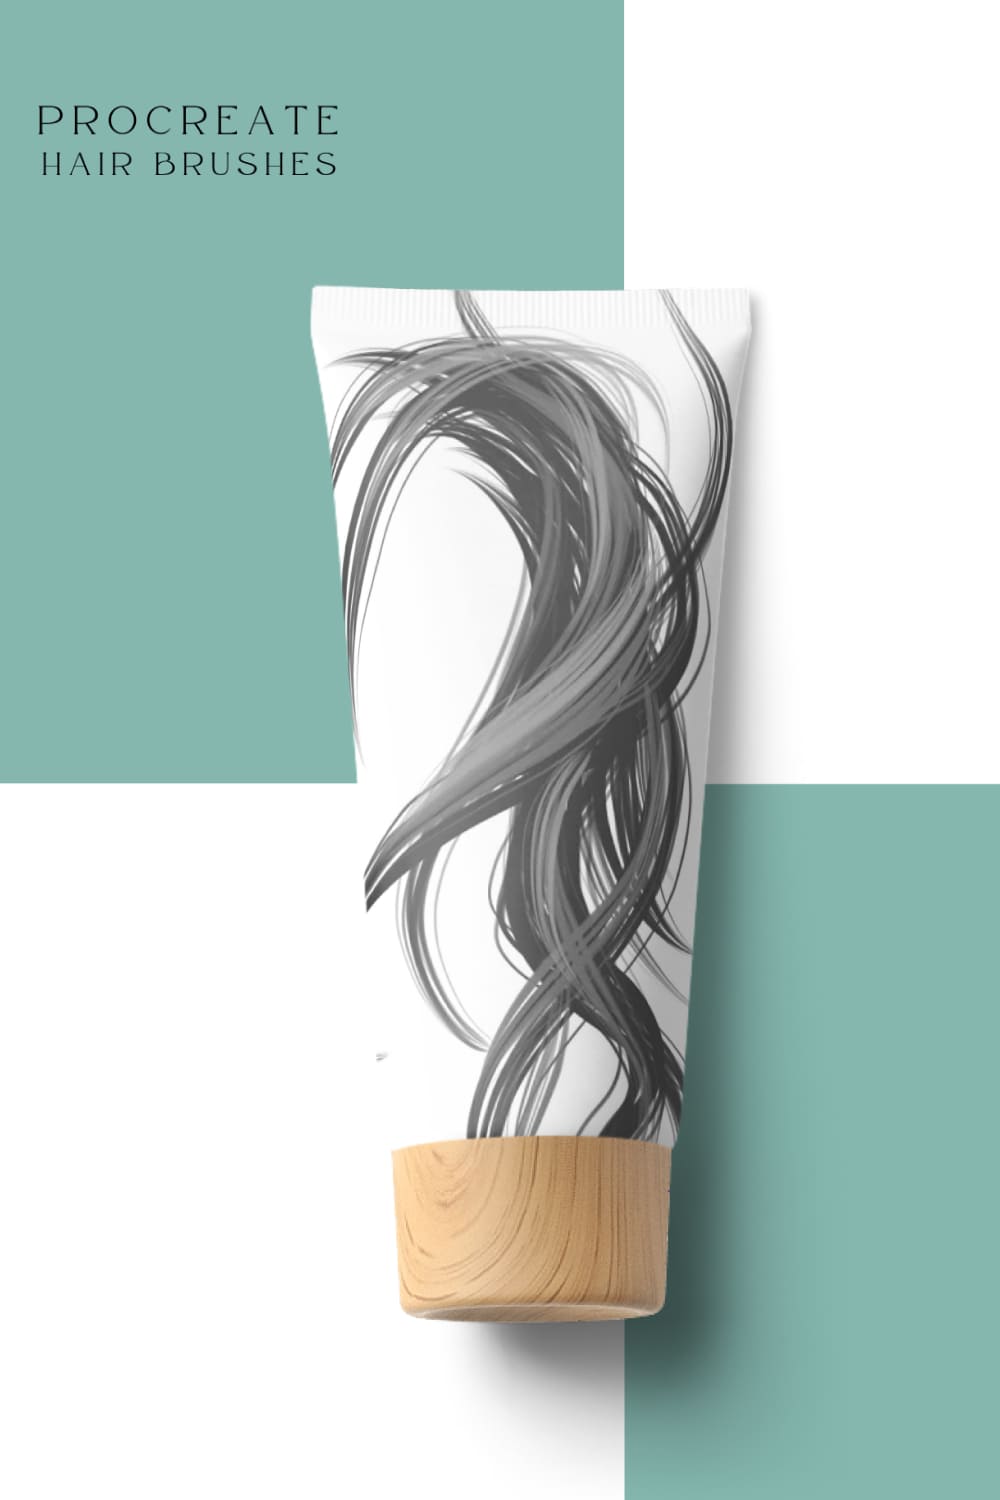 Procreate hair brushes, picture for pinterest 1000x1500.